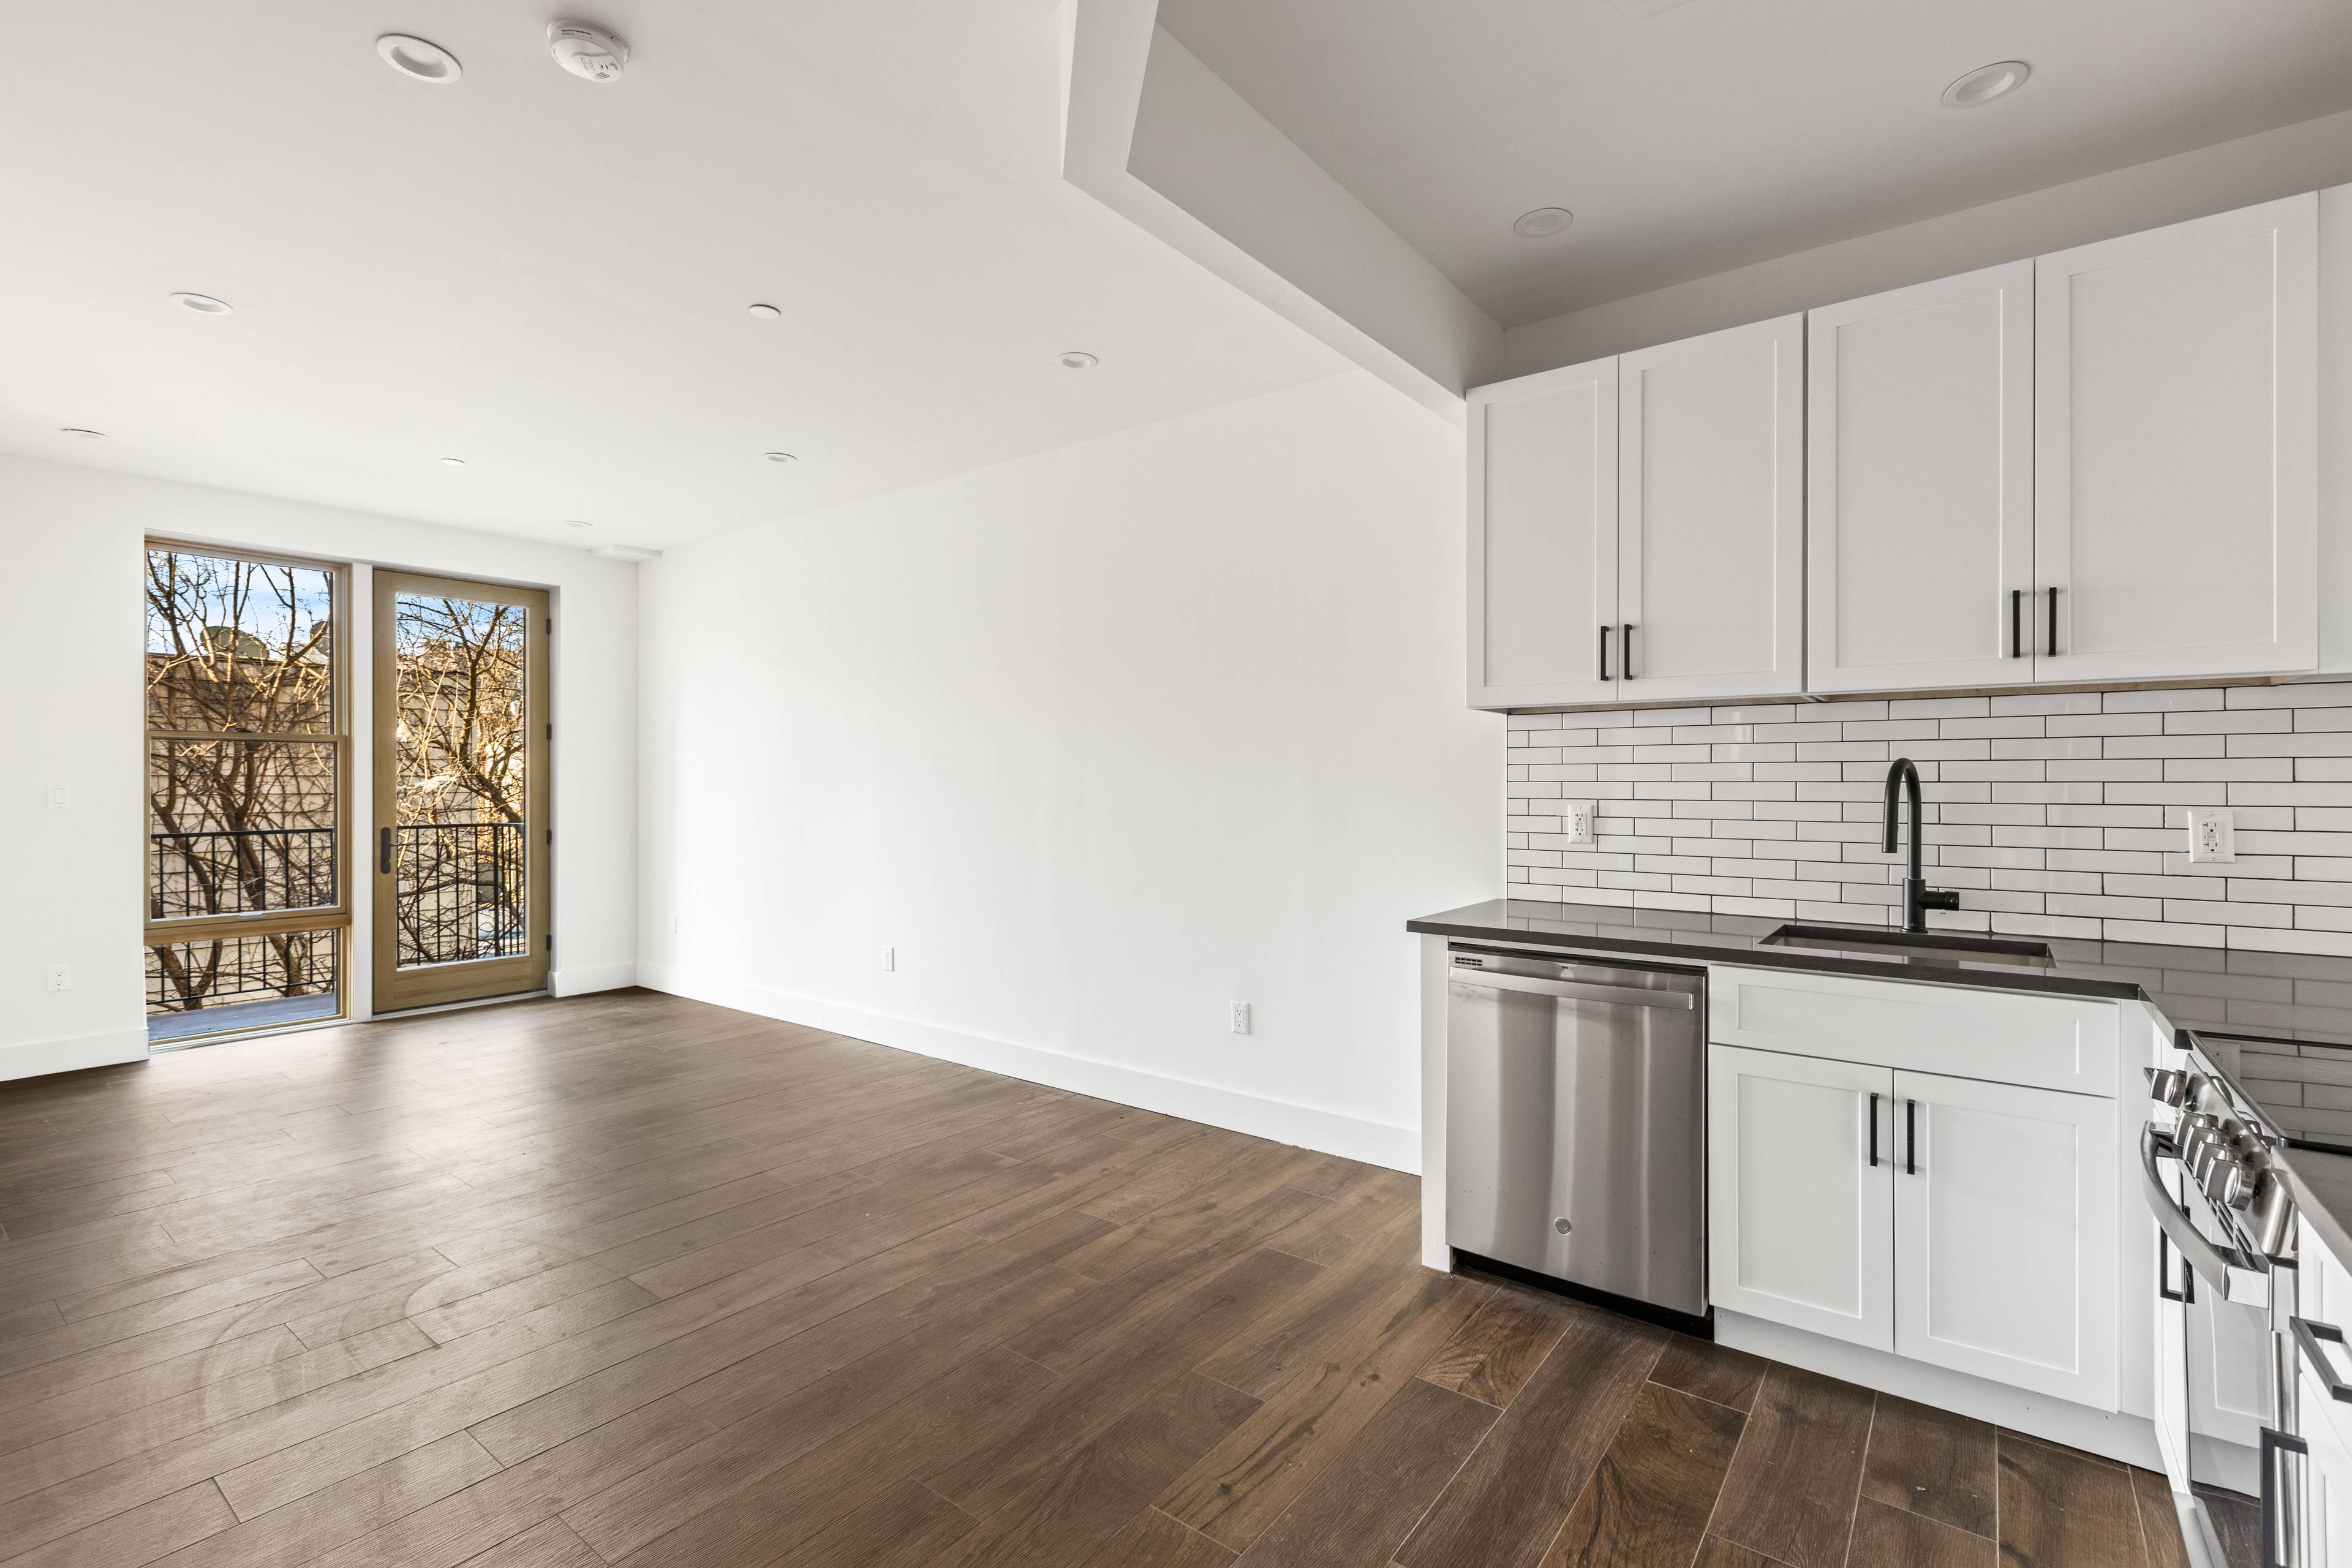 898 is a new boutique development in the heart of Bushwick offering one, two and three bedroom homes.